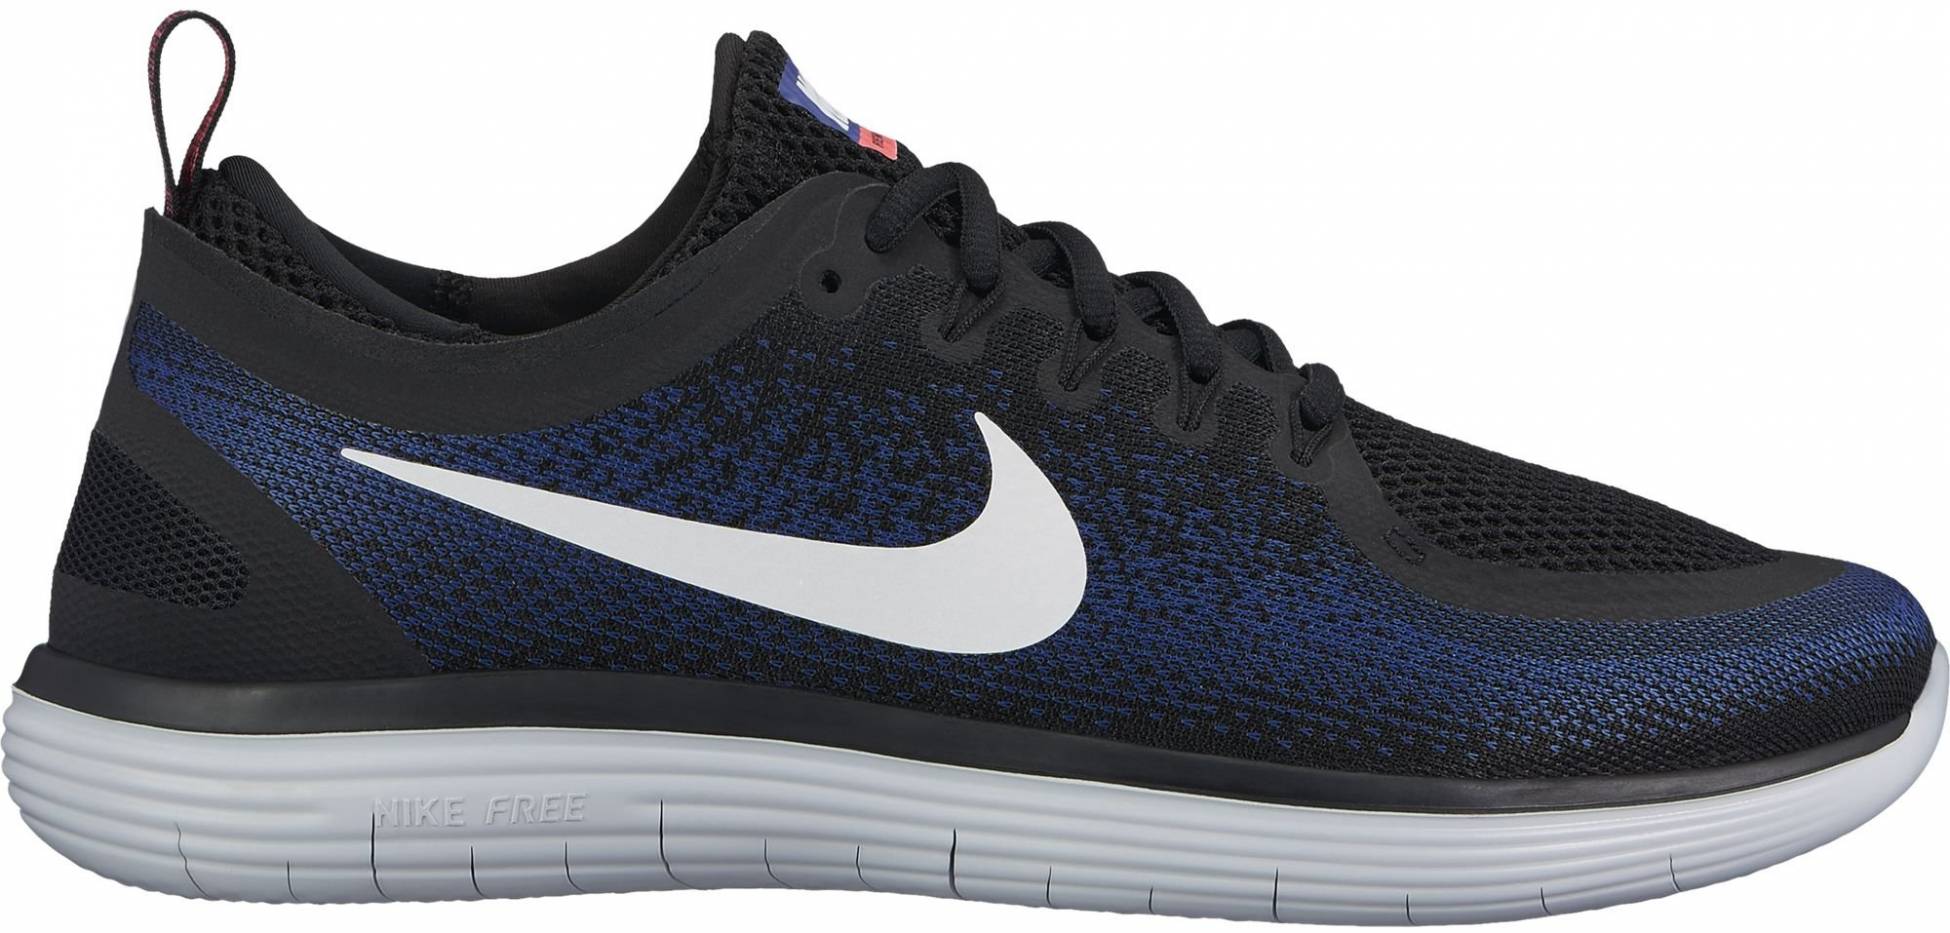 Only $70 + Review of Nike Free RN Distance 2 | RunRepeat